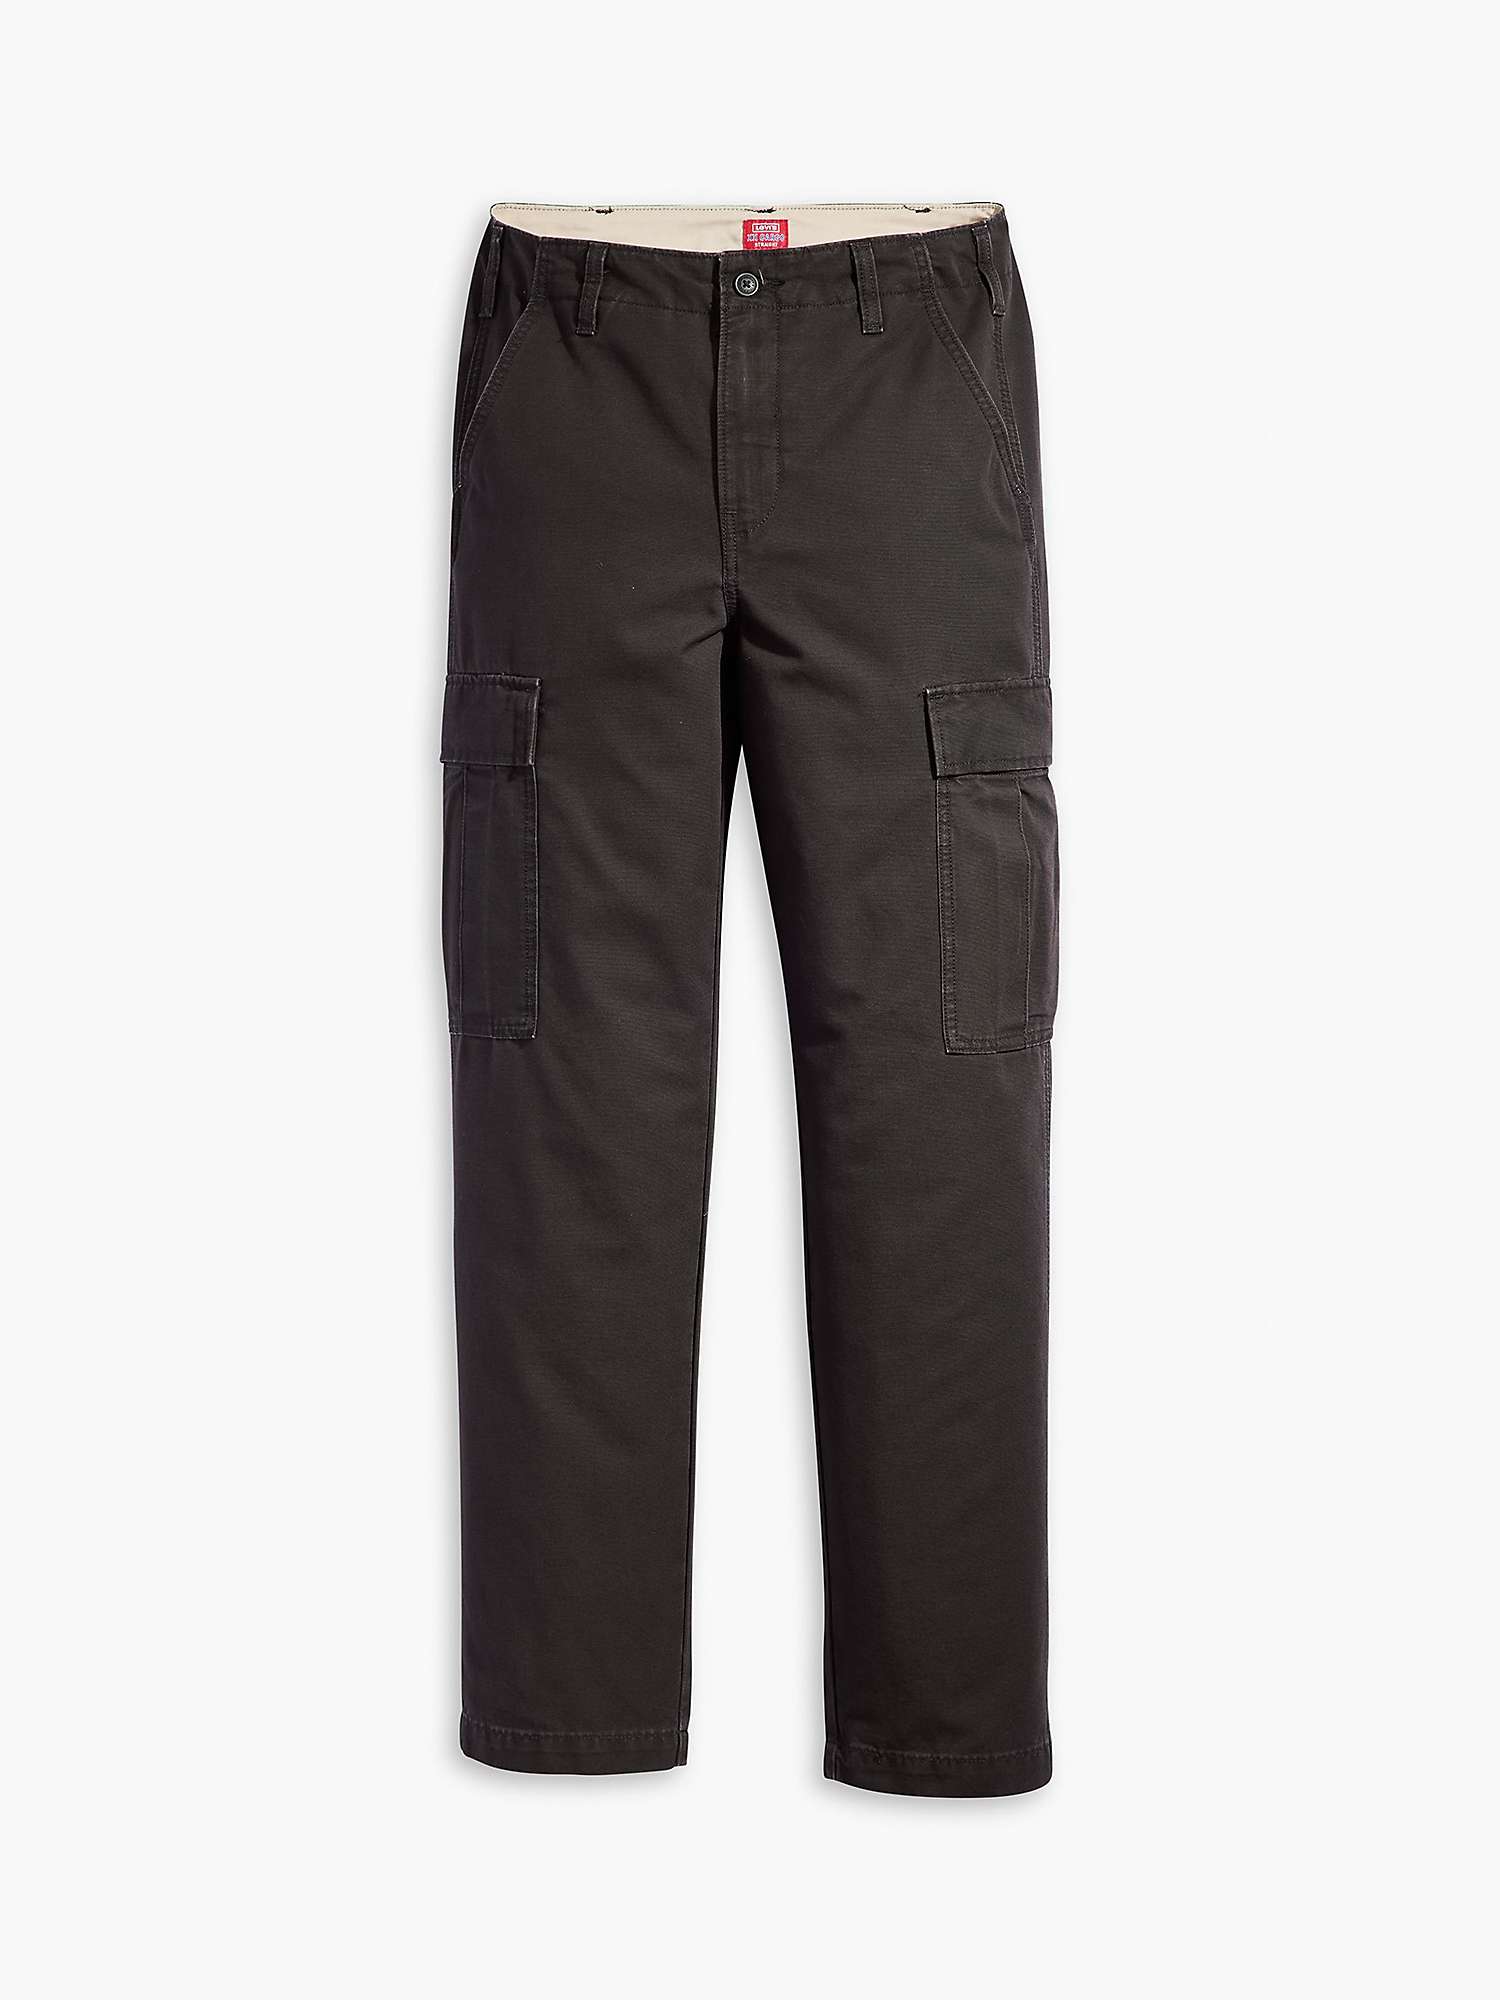 Buy Levi's XX Straight Fit Cargo Trousers, Meteorite Canvas Online at johnlewis.com